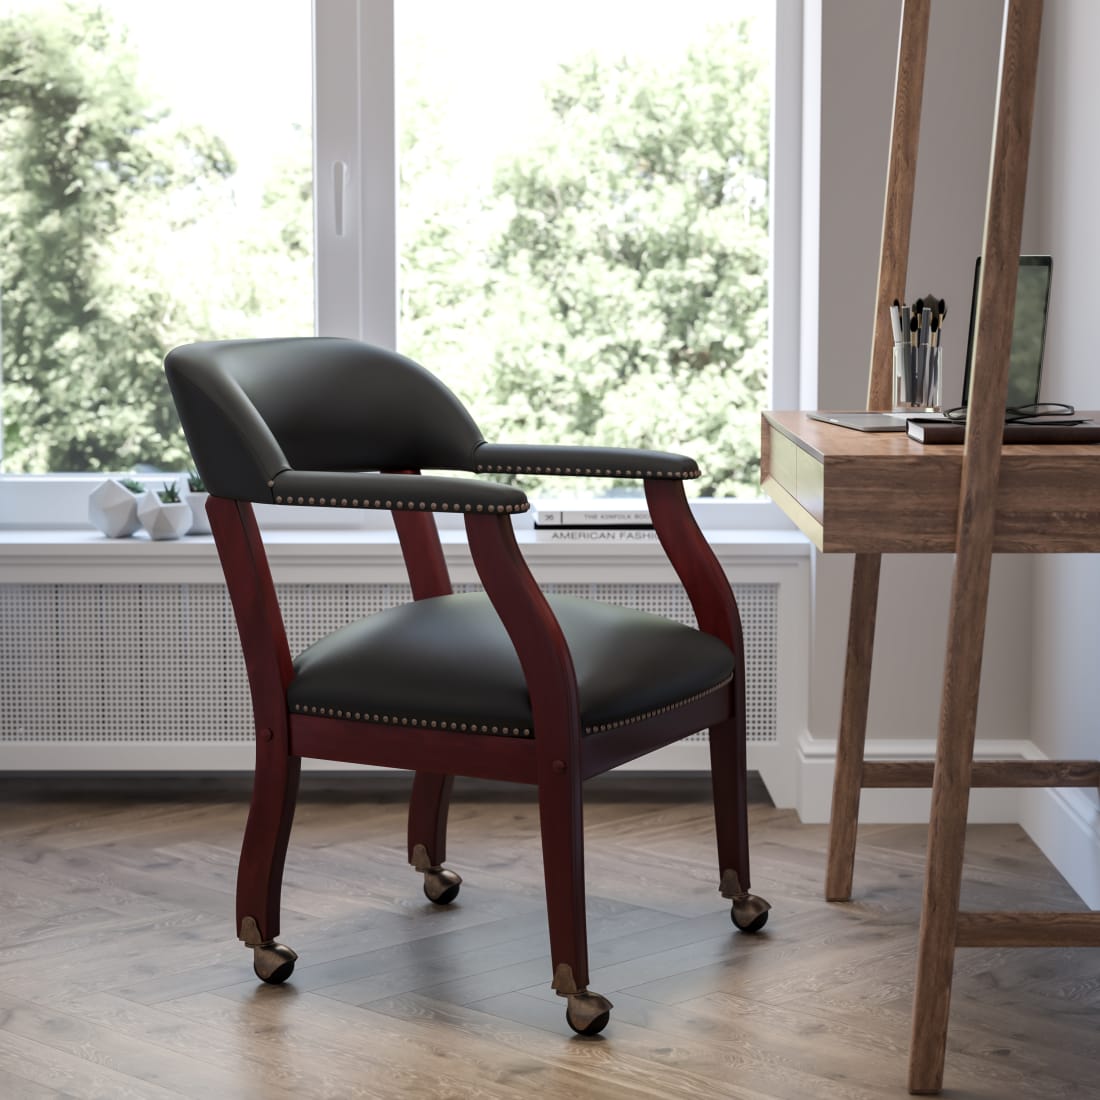 Black LeatherSoft Conference Chair with Accent Nail Trim and Casters - BZ100LF0005BKLEAGG